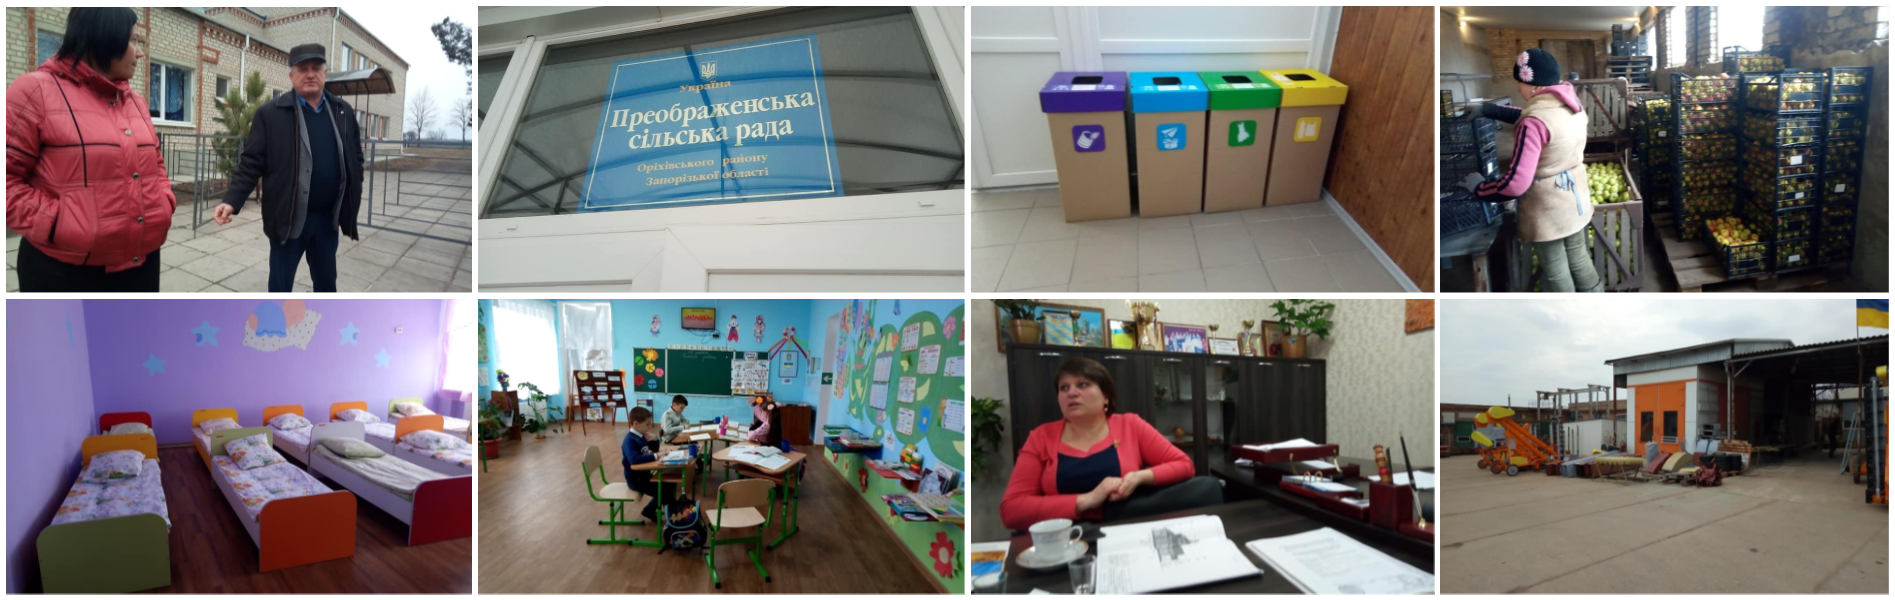 Hospital without waiting lines, new kindergartens, garden tourism, public information on LED screens and other features – success story of Preobrazhenska AH